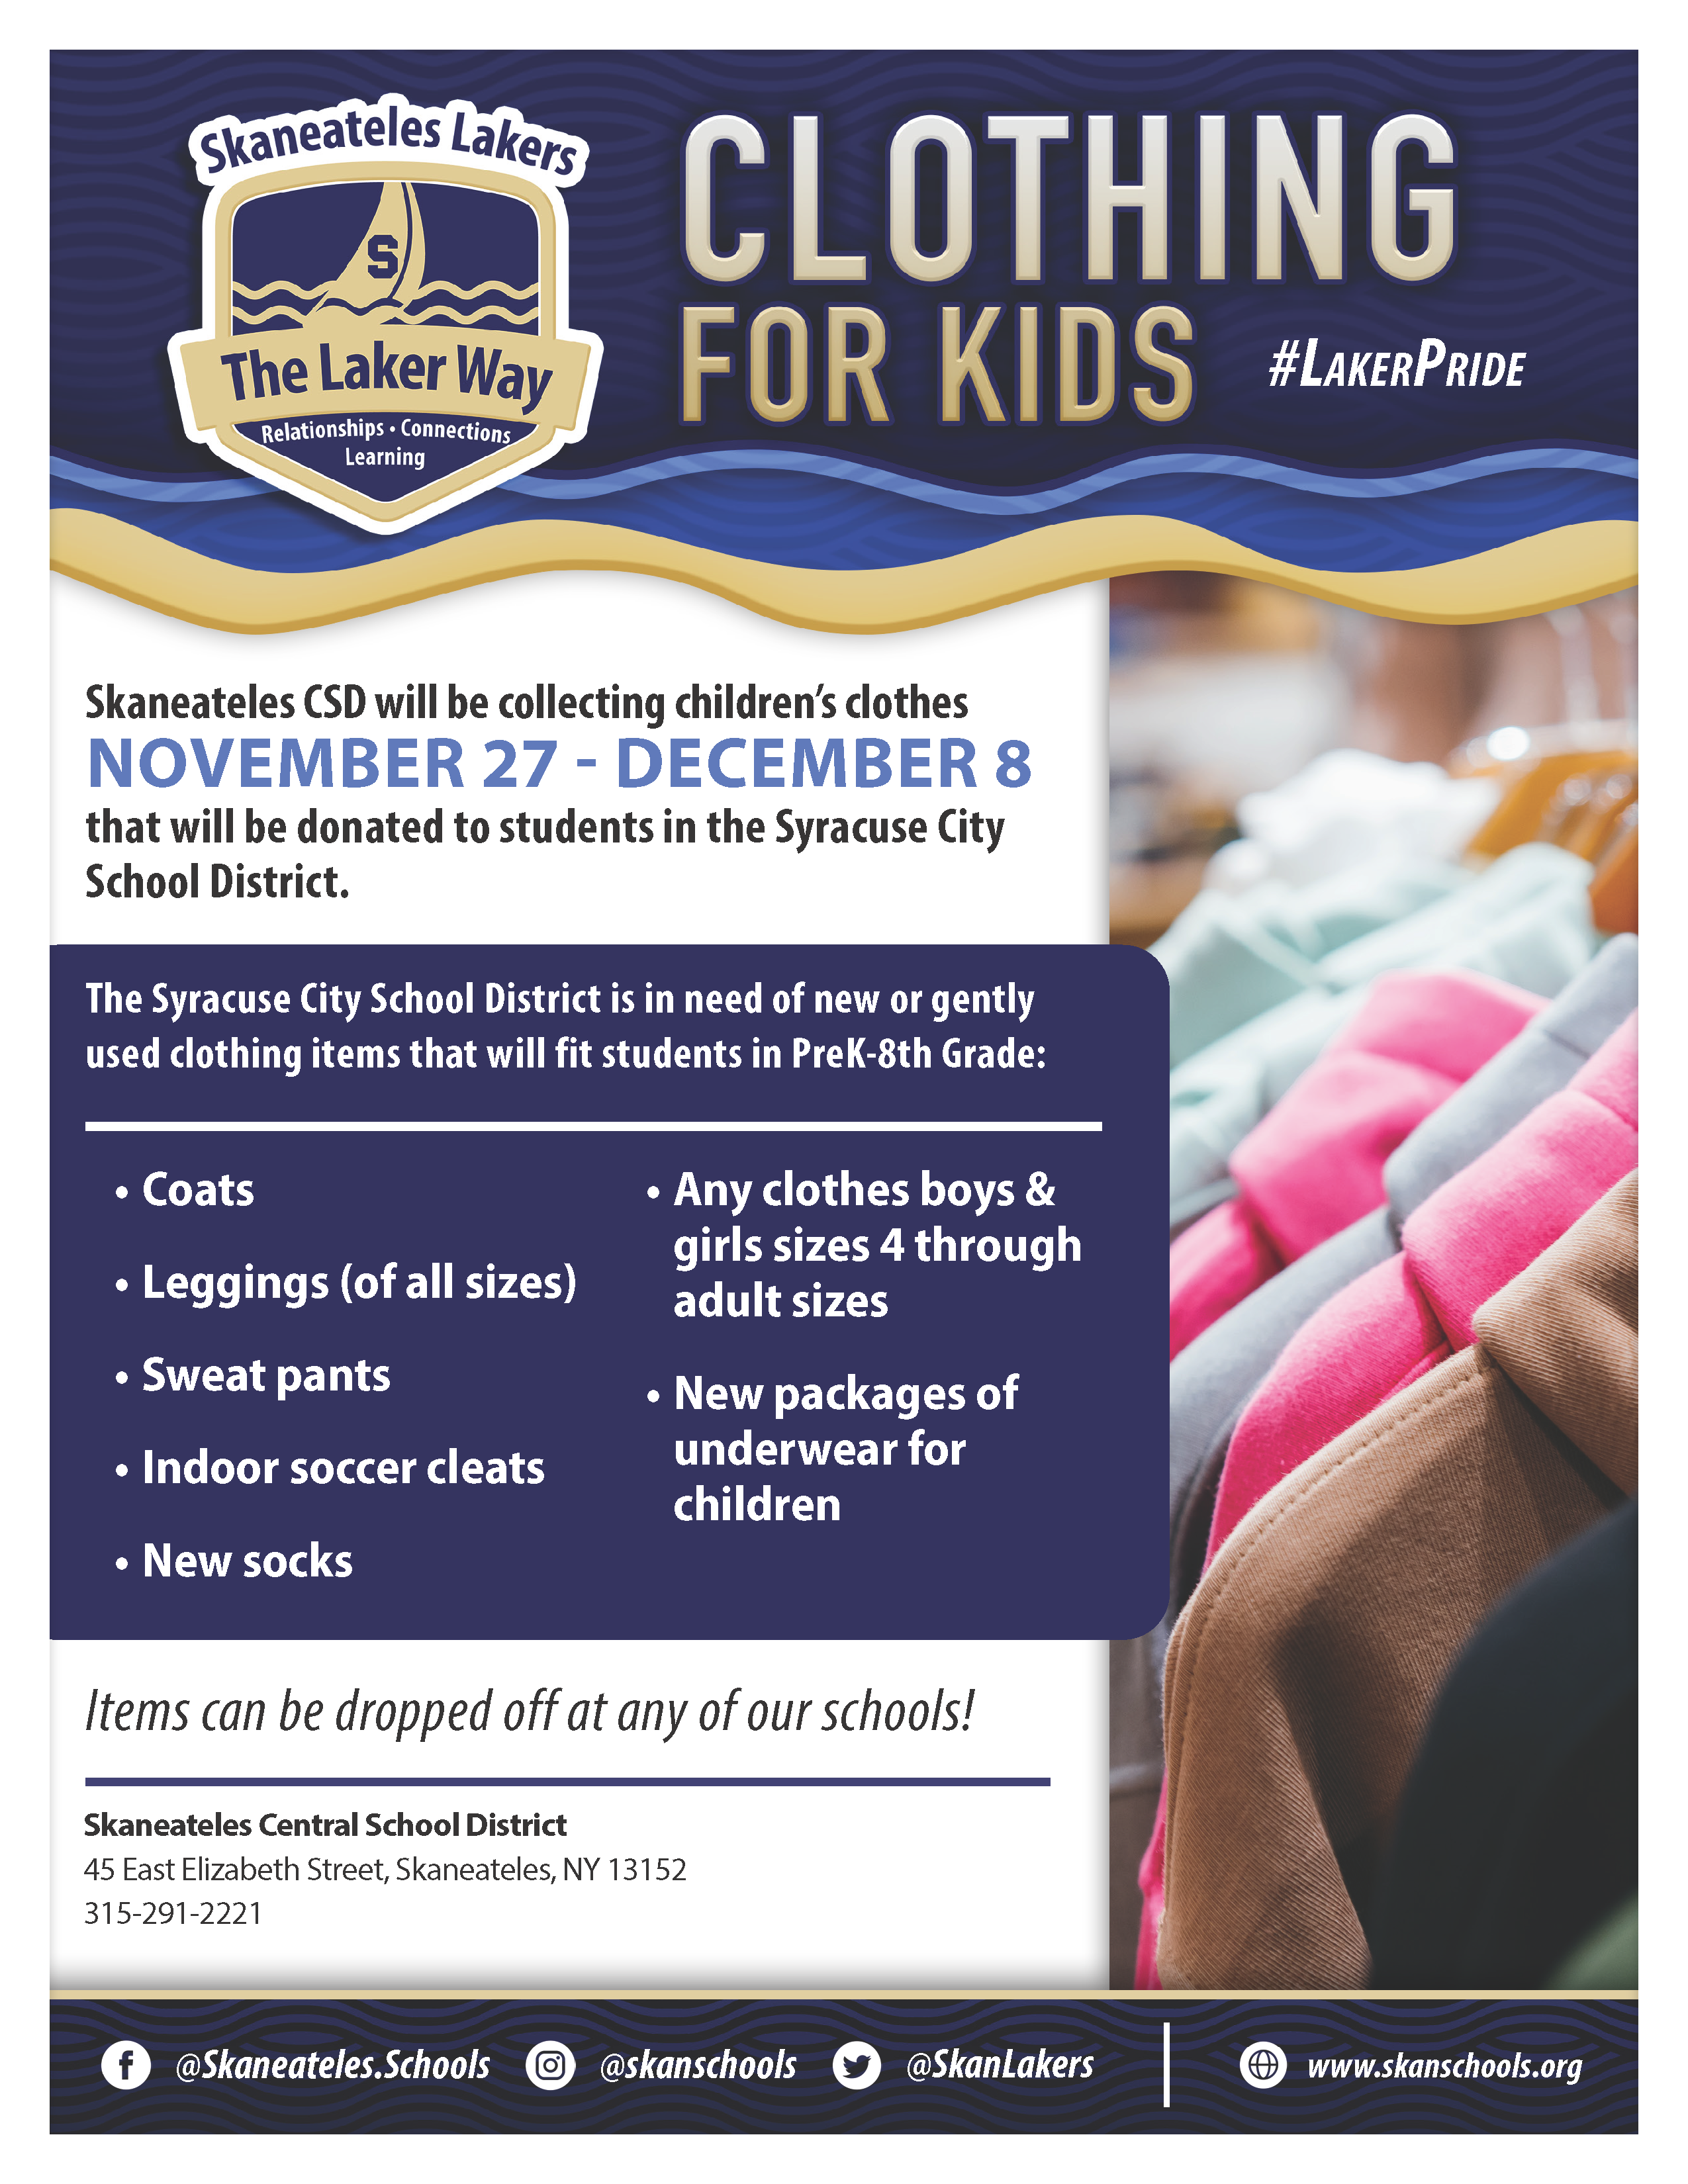 Skaneateles CSD Clothing For Kids Skaneateles will be collecting children's clothes from Nov. 27 to Dec. 8 that will be donated to students in the Syracuse CSD. They are in need of new or gently used clothing items that will fit students in PreK through 8th Grade: Coats, leggings of all sizes, sweatpants, indoor soccer cleats, new socks, any clothes boys  & girls sizes 4 through adult sizes, new packages of underwear for children. Items can be dropped off at any of our schools!